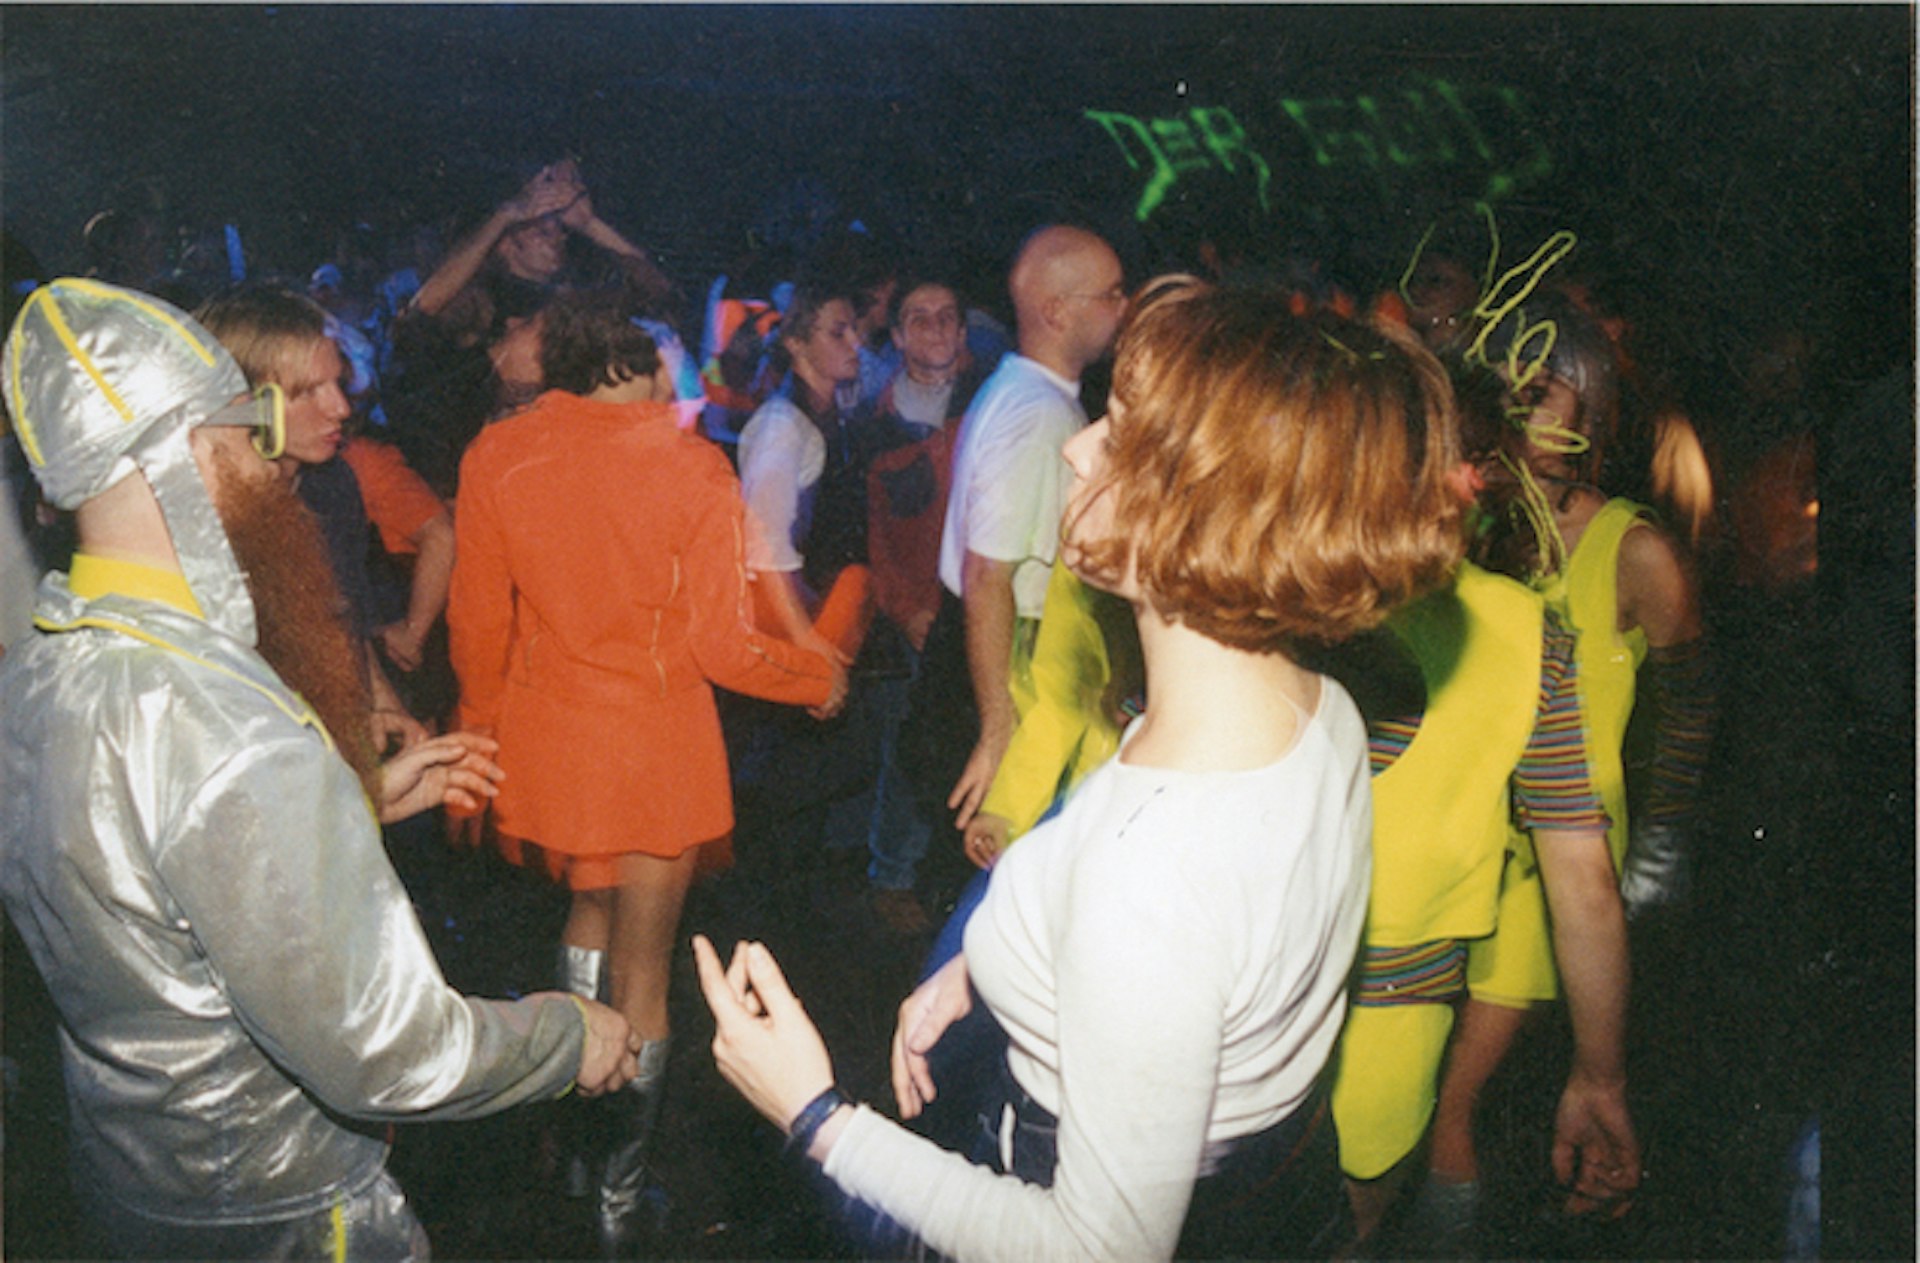 The history of art and rave culture in ’90s Poland